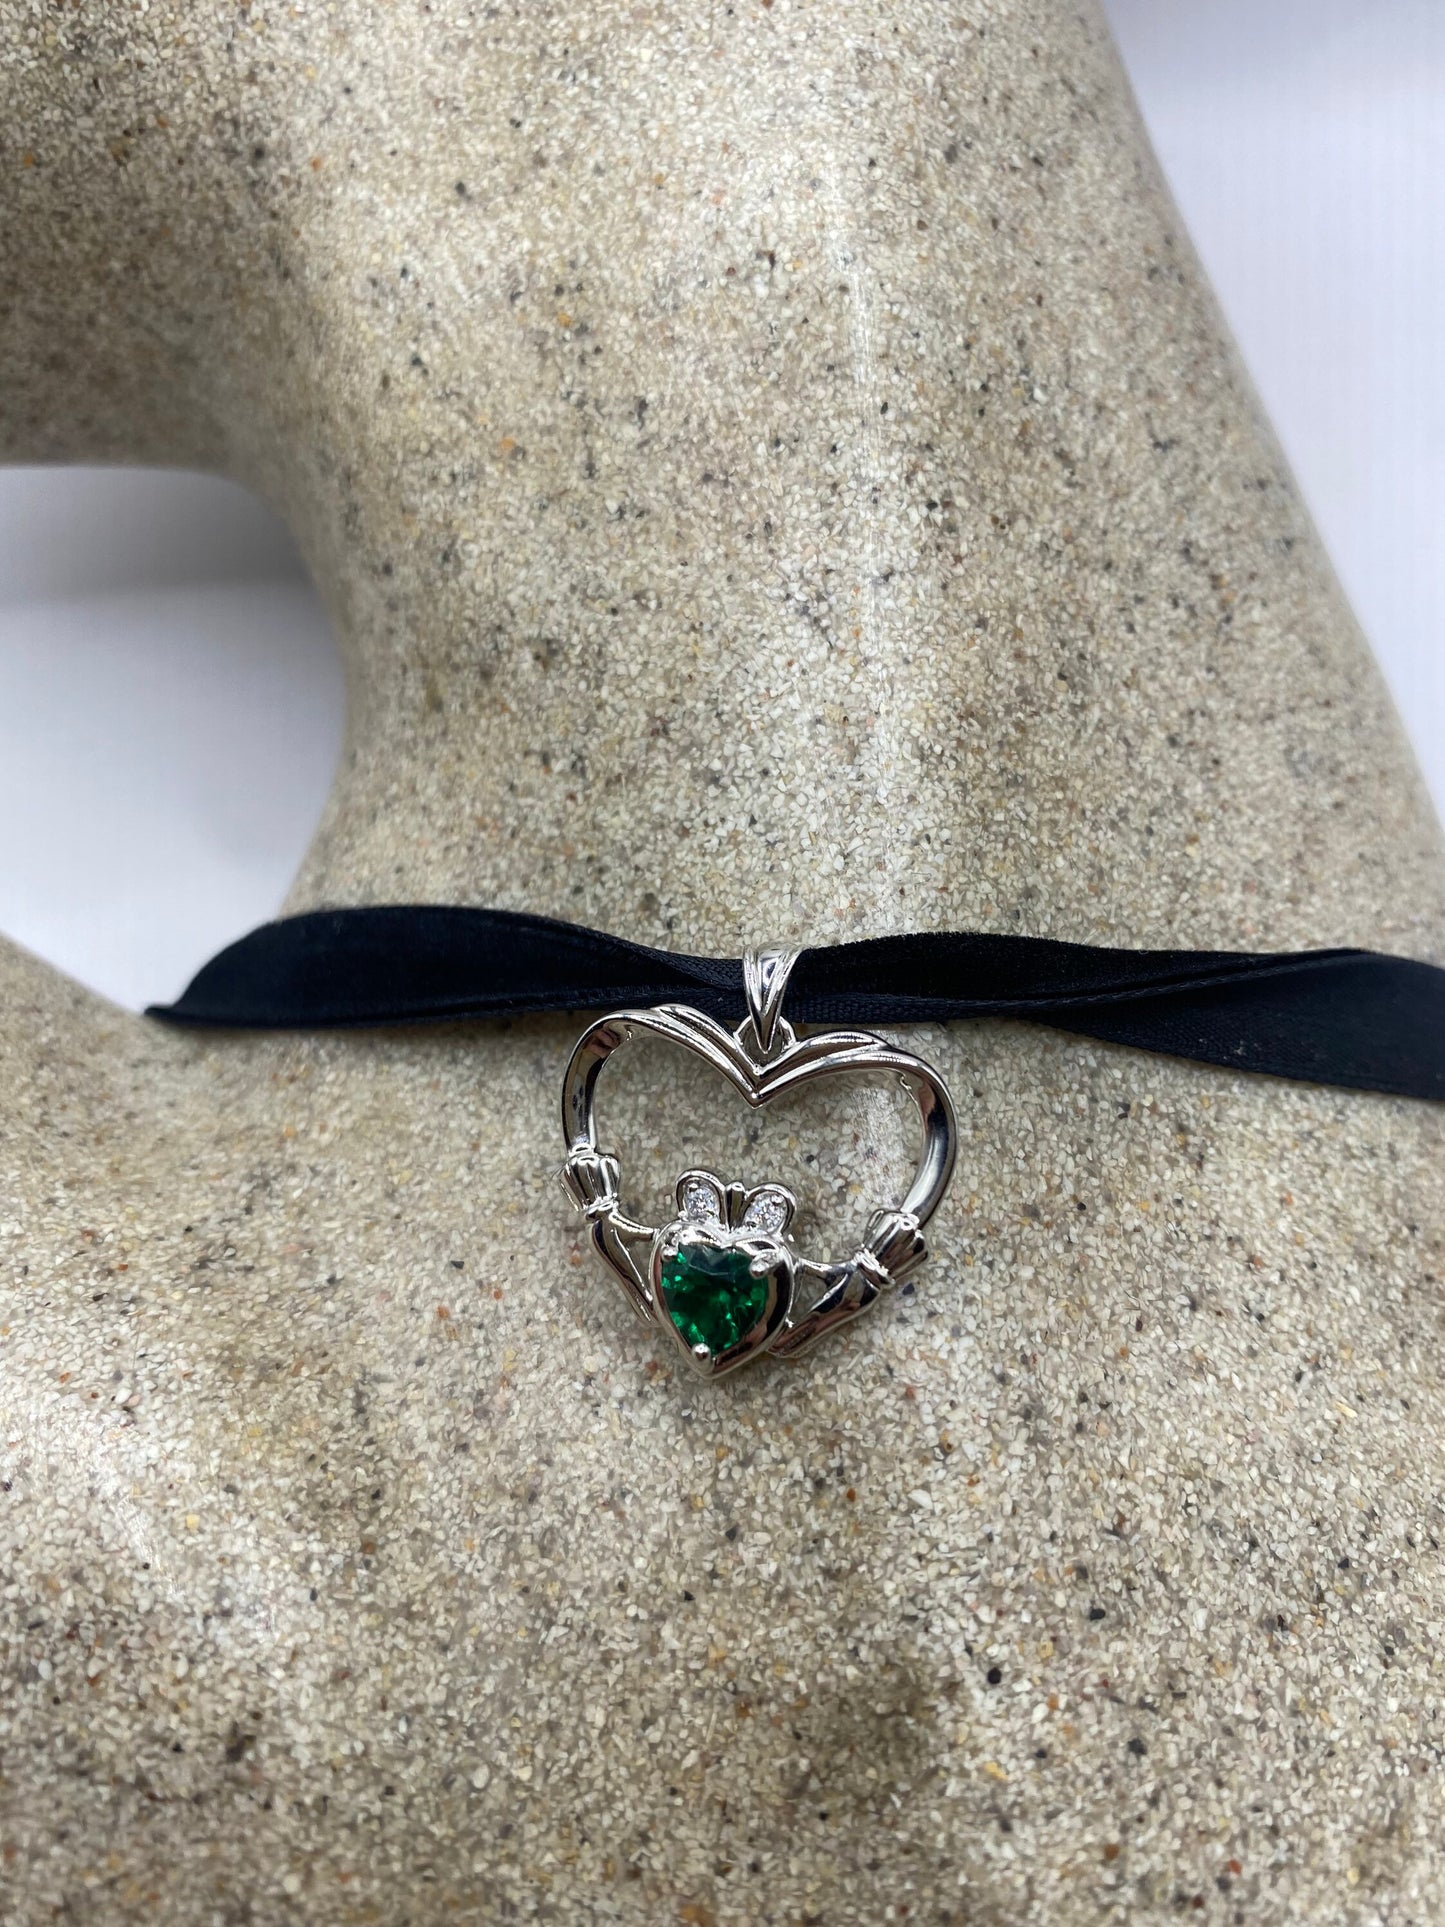 Vintage Green Chrome Diopside Choker 925 Sterling Silver Heart Pendant Necklace